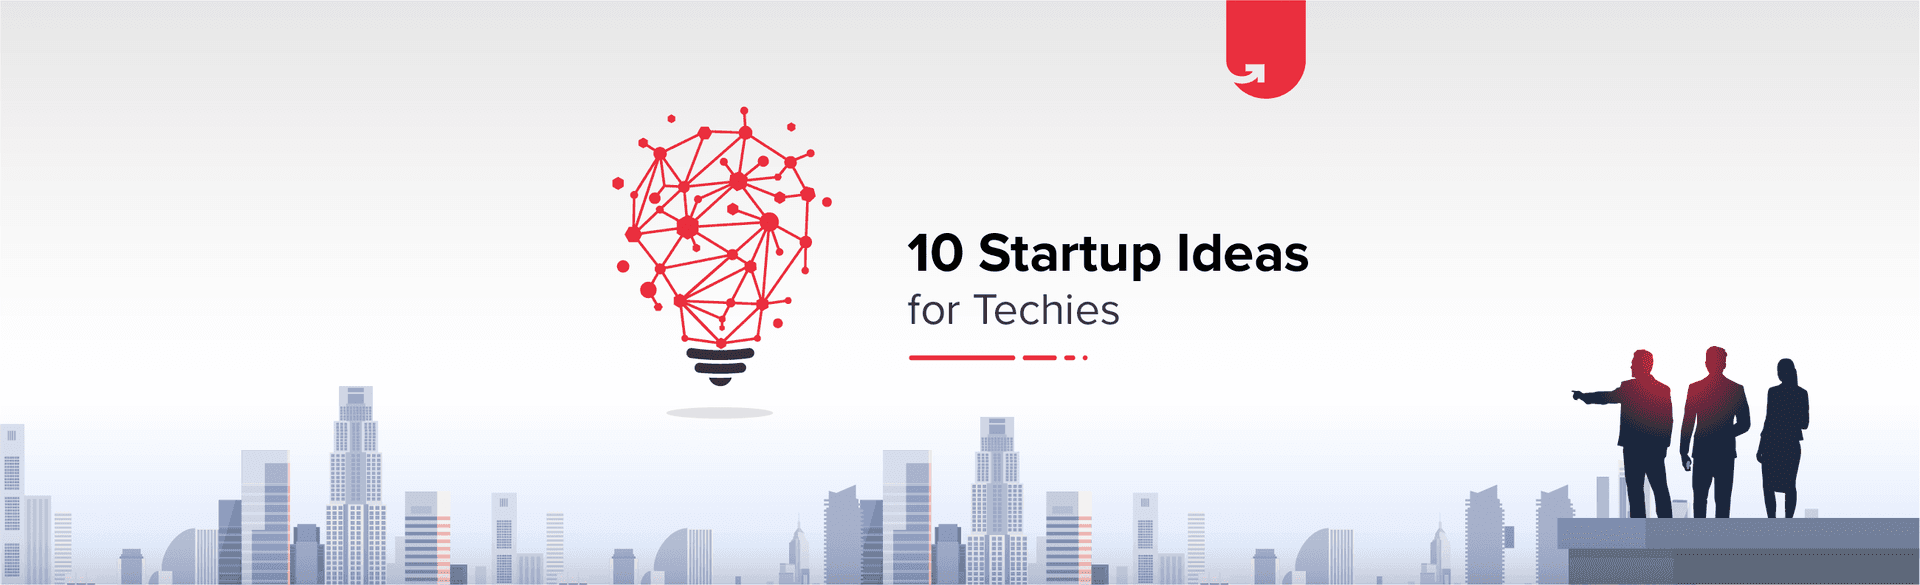 10 Startup Ideas for Techies to Become an Entrepreneur